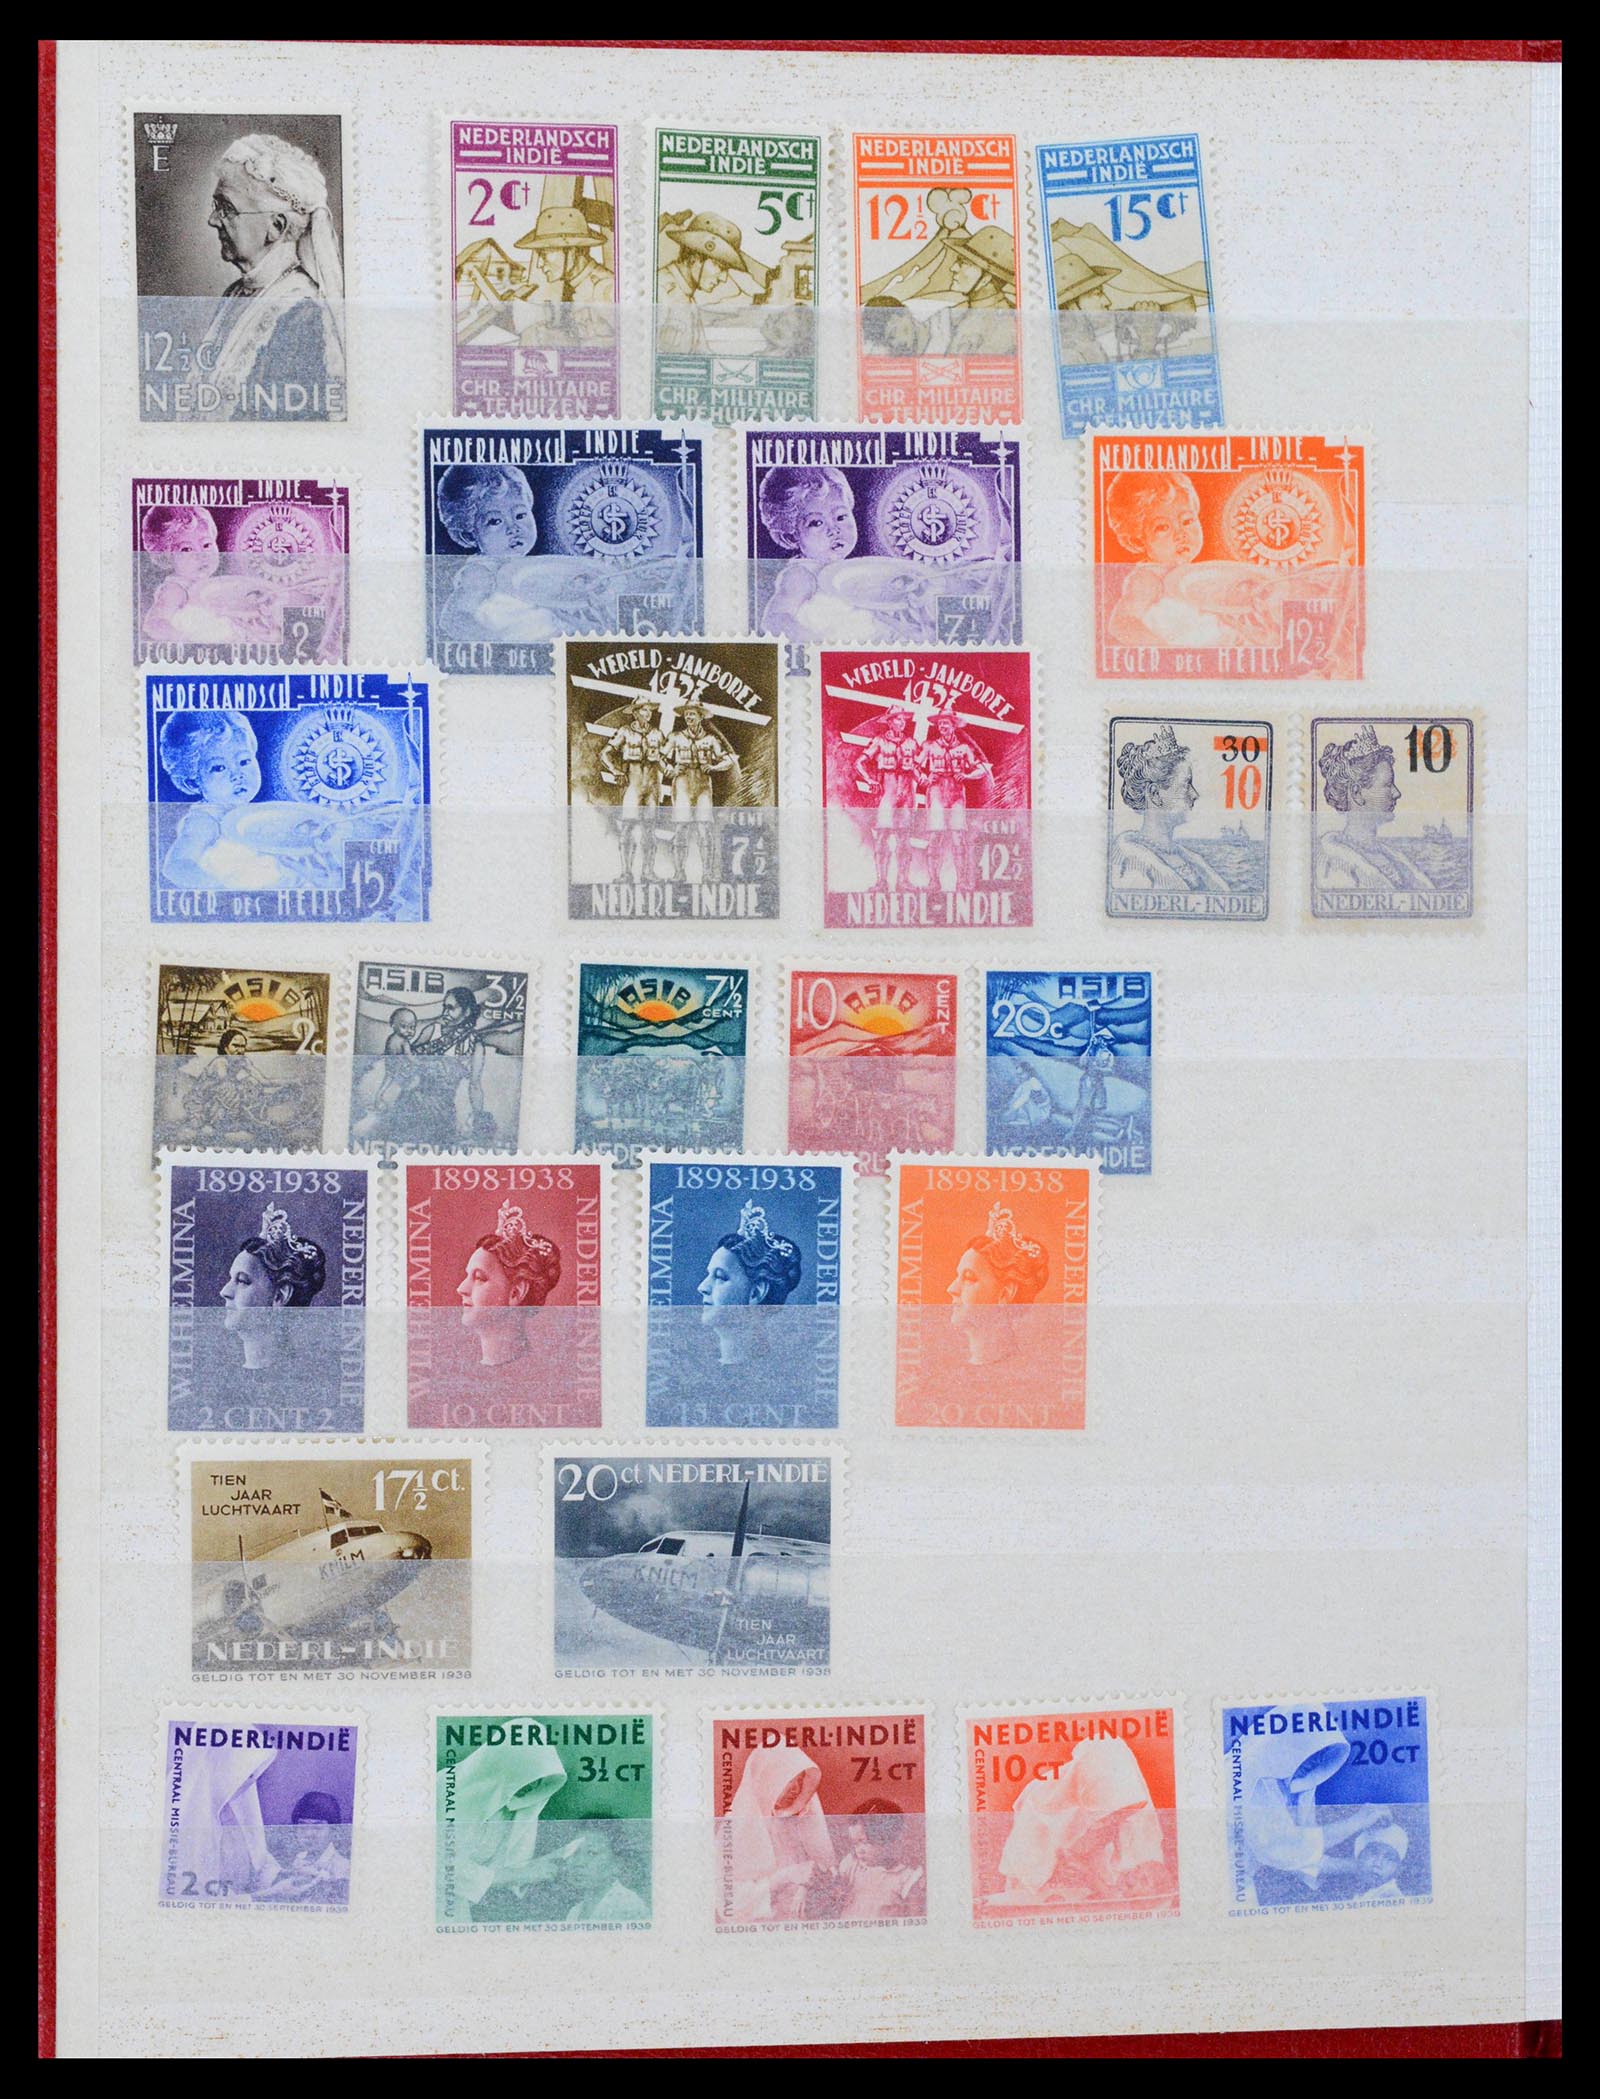 39359 0008 - Stamp collection 39359 Dutch east Indies 1864-1948.